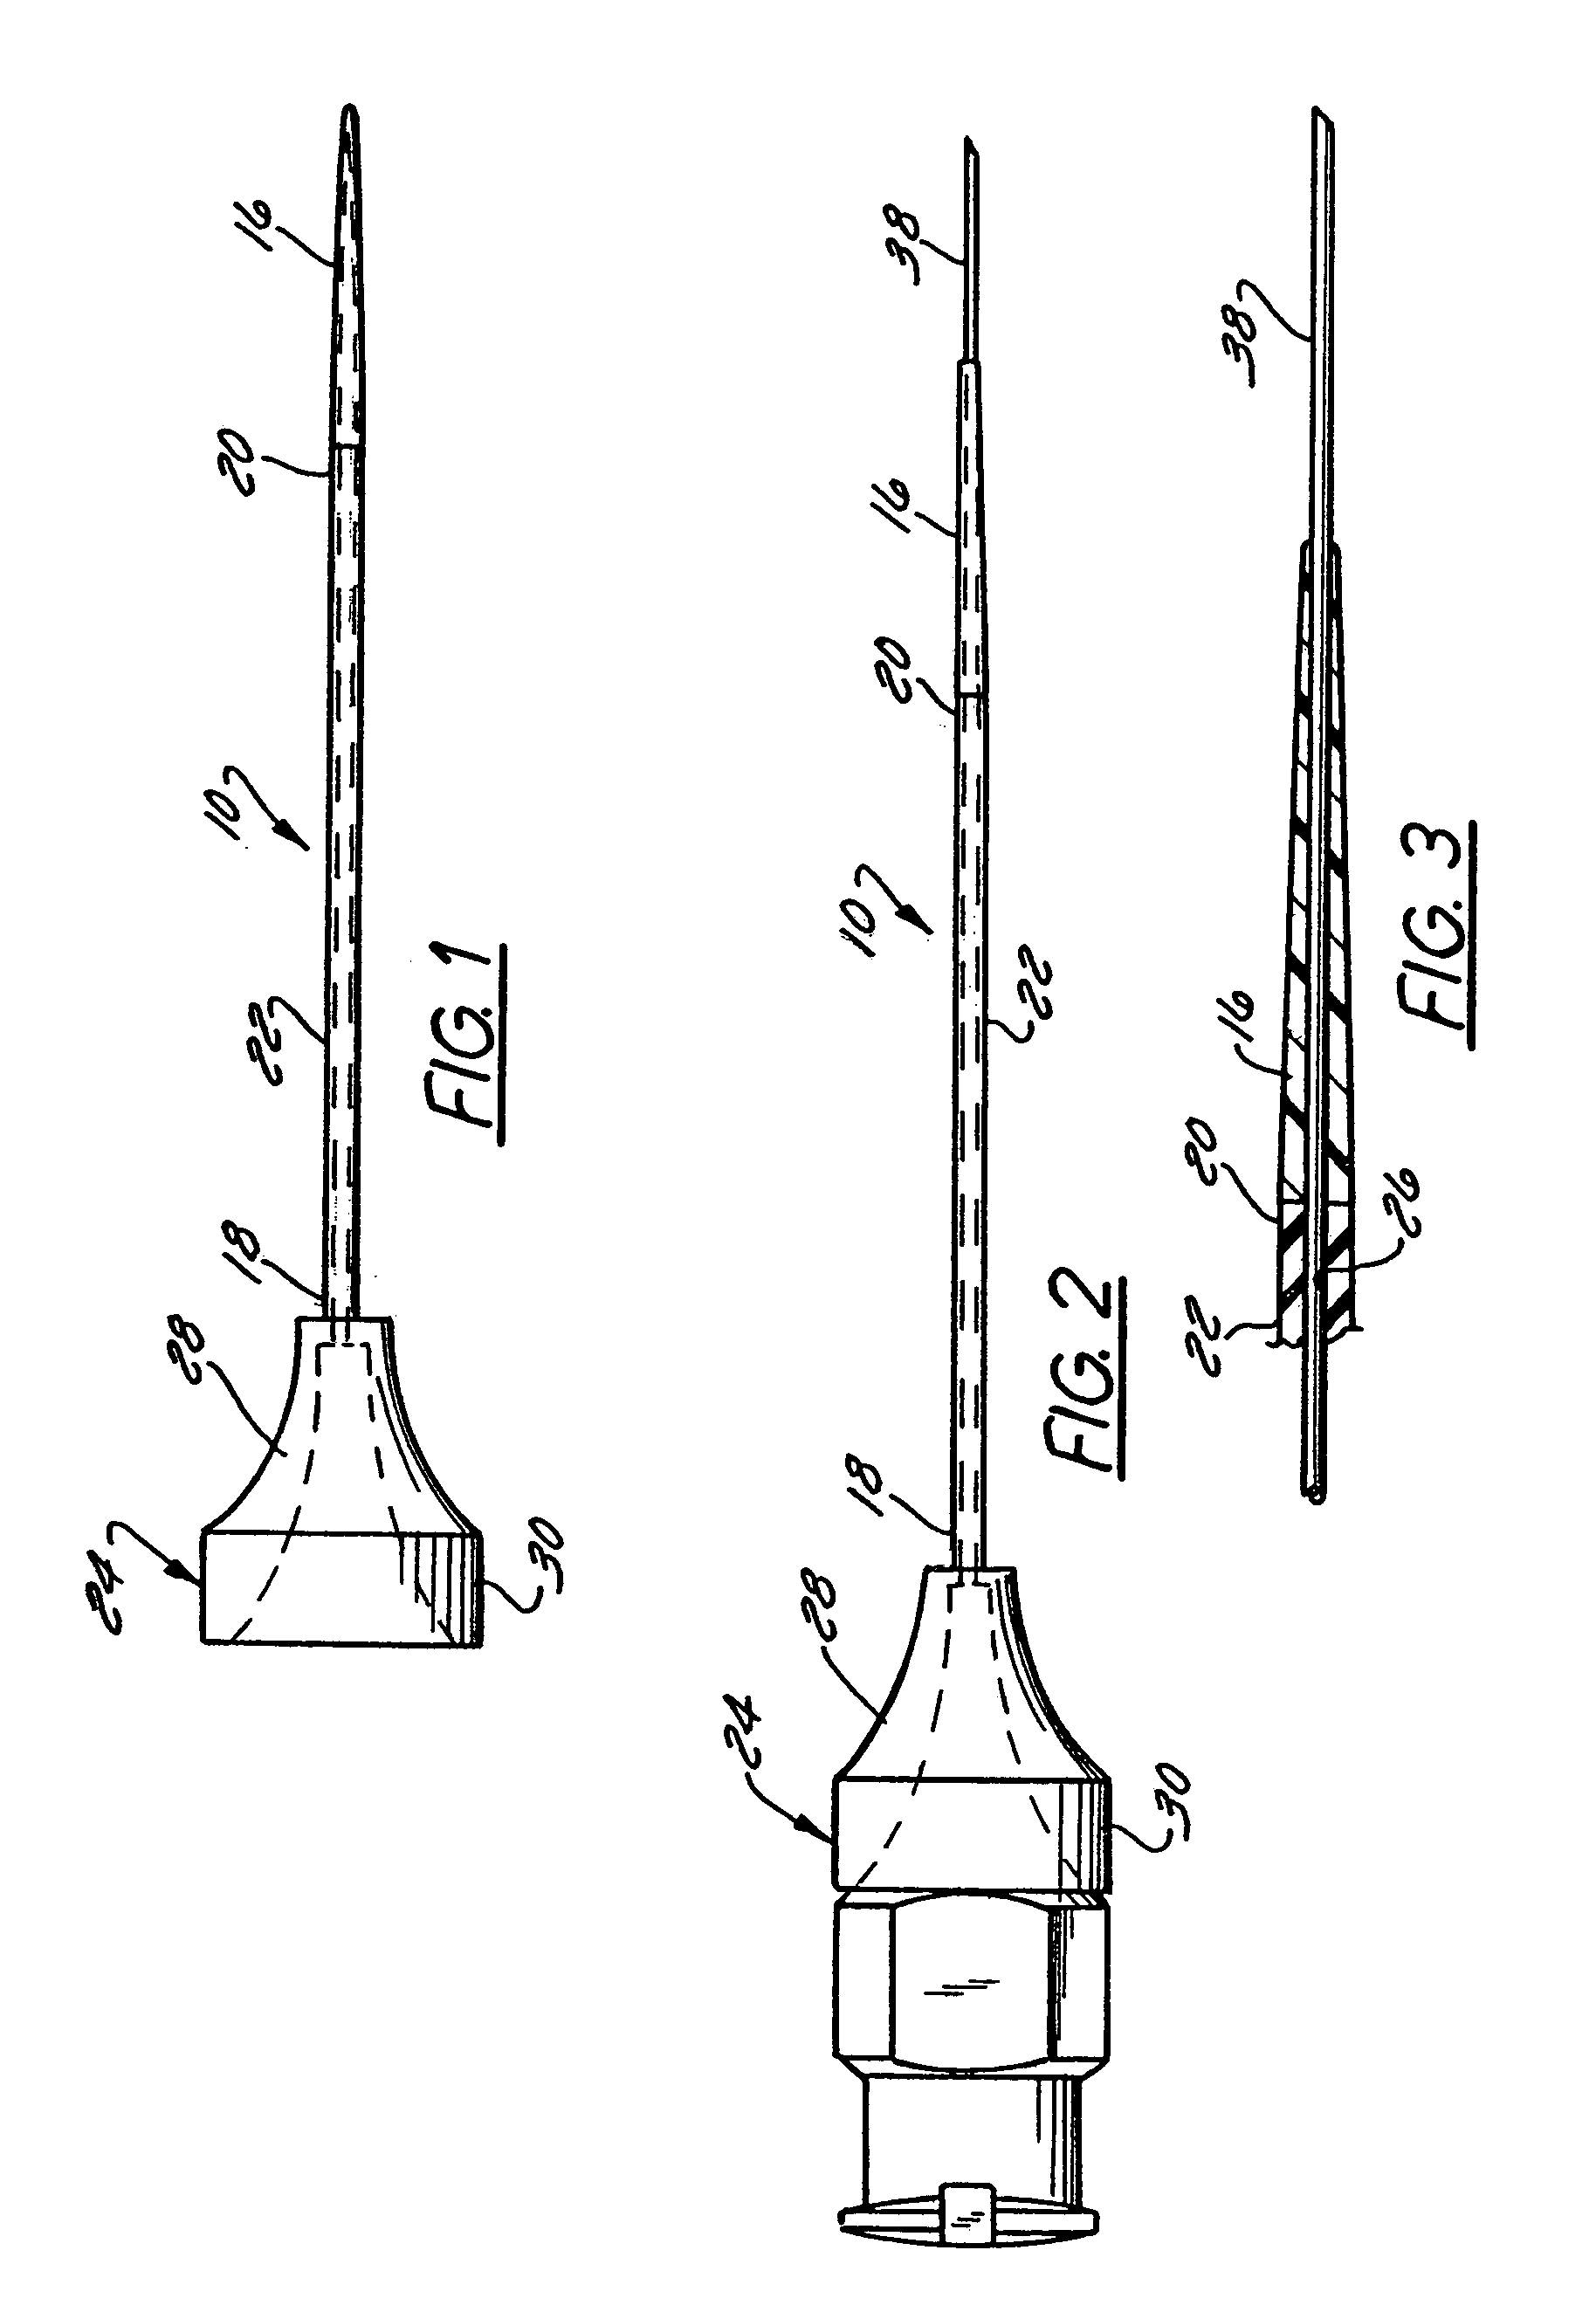 Catheter introducer having an expandable tip